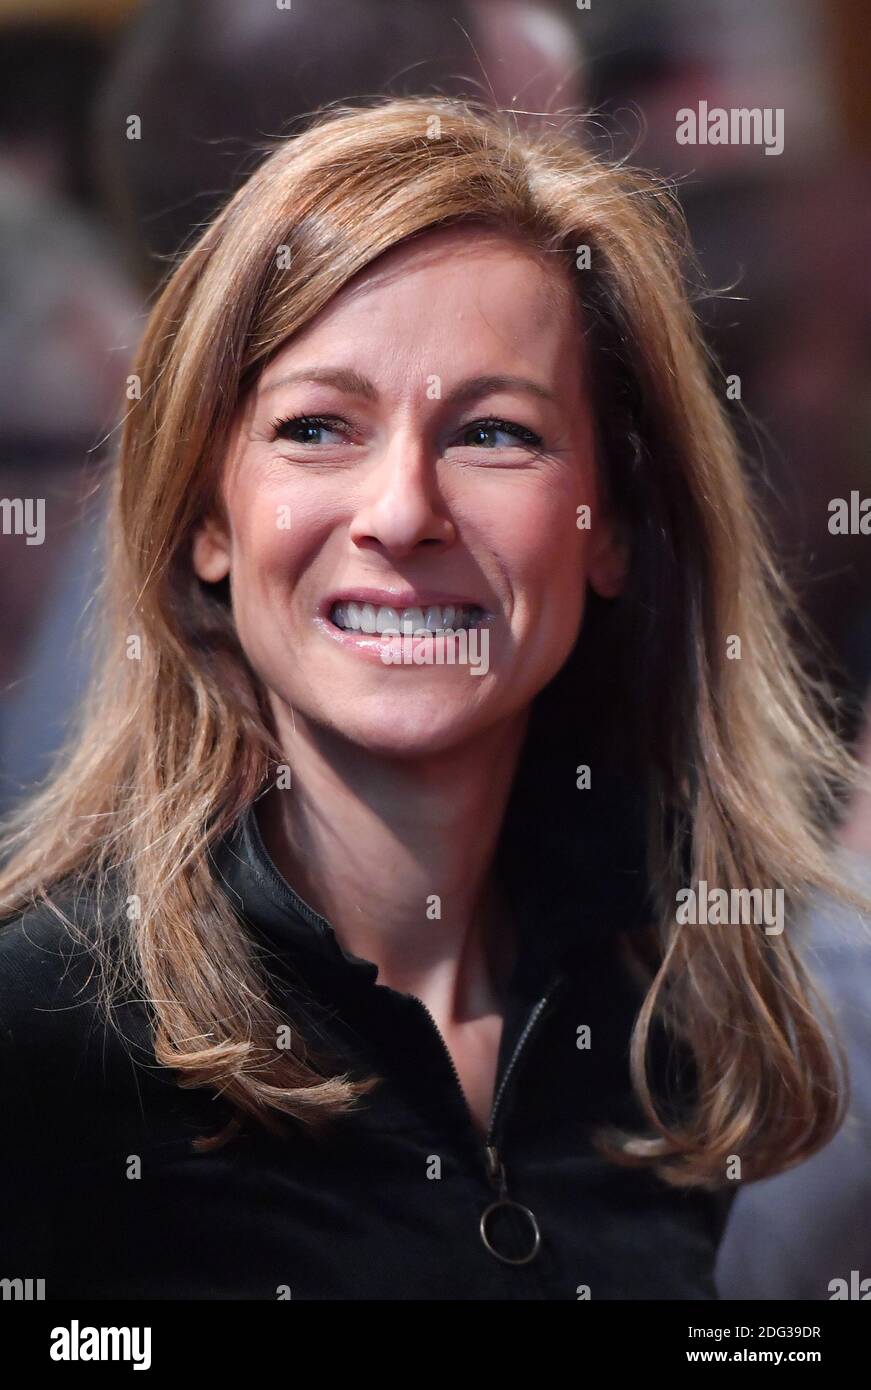 Anne Gravoin, wife of the Former French Prime Minister and candidate for Socialist Party Primaries for the 2017 French Presidential election, Manuel Valls, during a meeting in Lievin, France on January 08, 2017. Photo by Christian Liewig/ABACAPRESS.COM Stock Photo